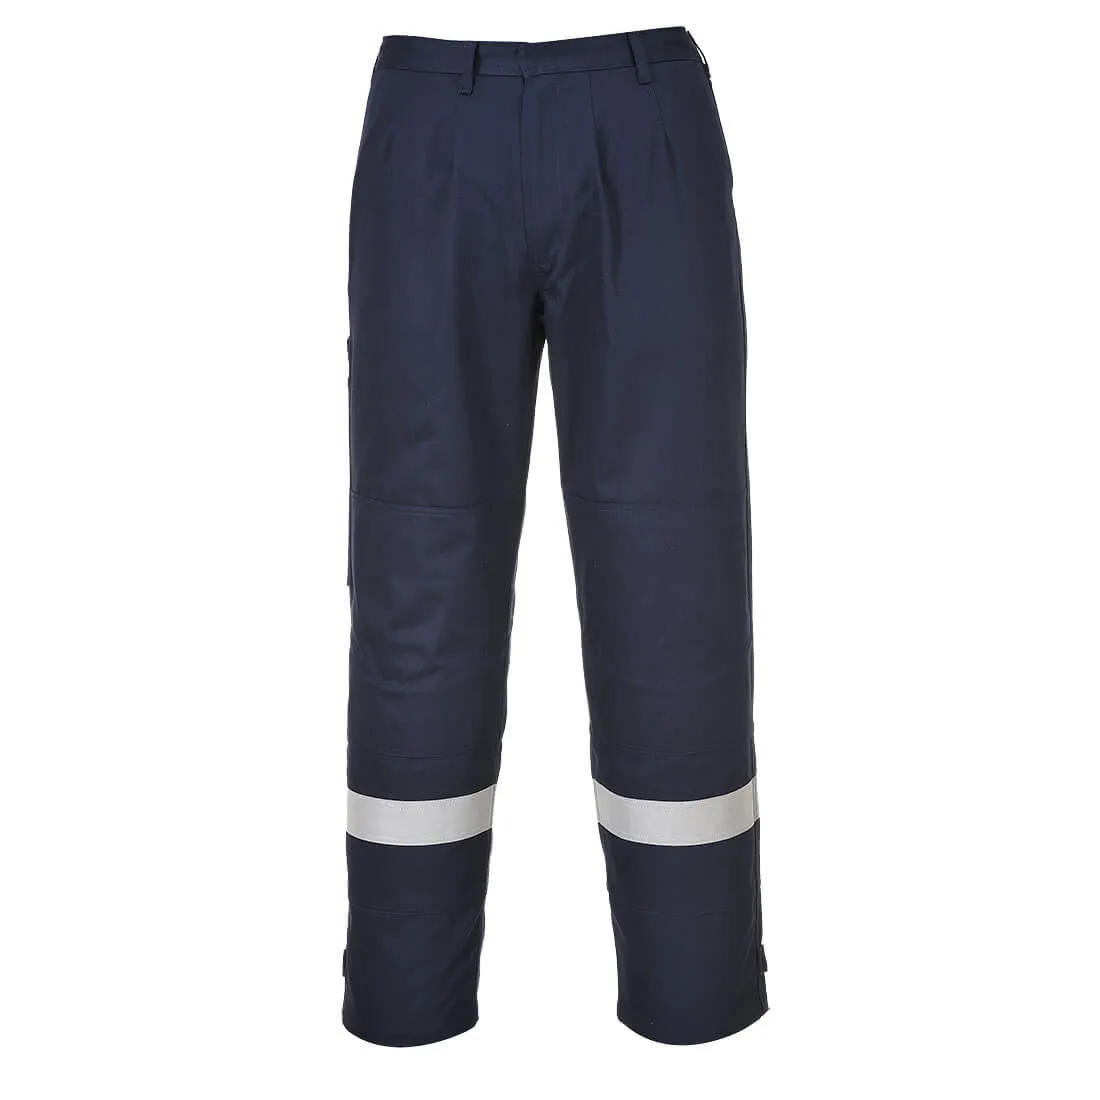 Biz Flame Plus Mens Flame Resistant Trousers - Navy Blue, Small, 32"